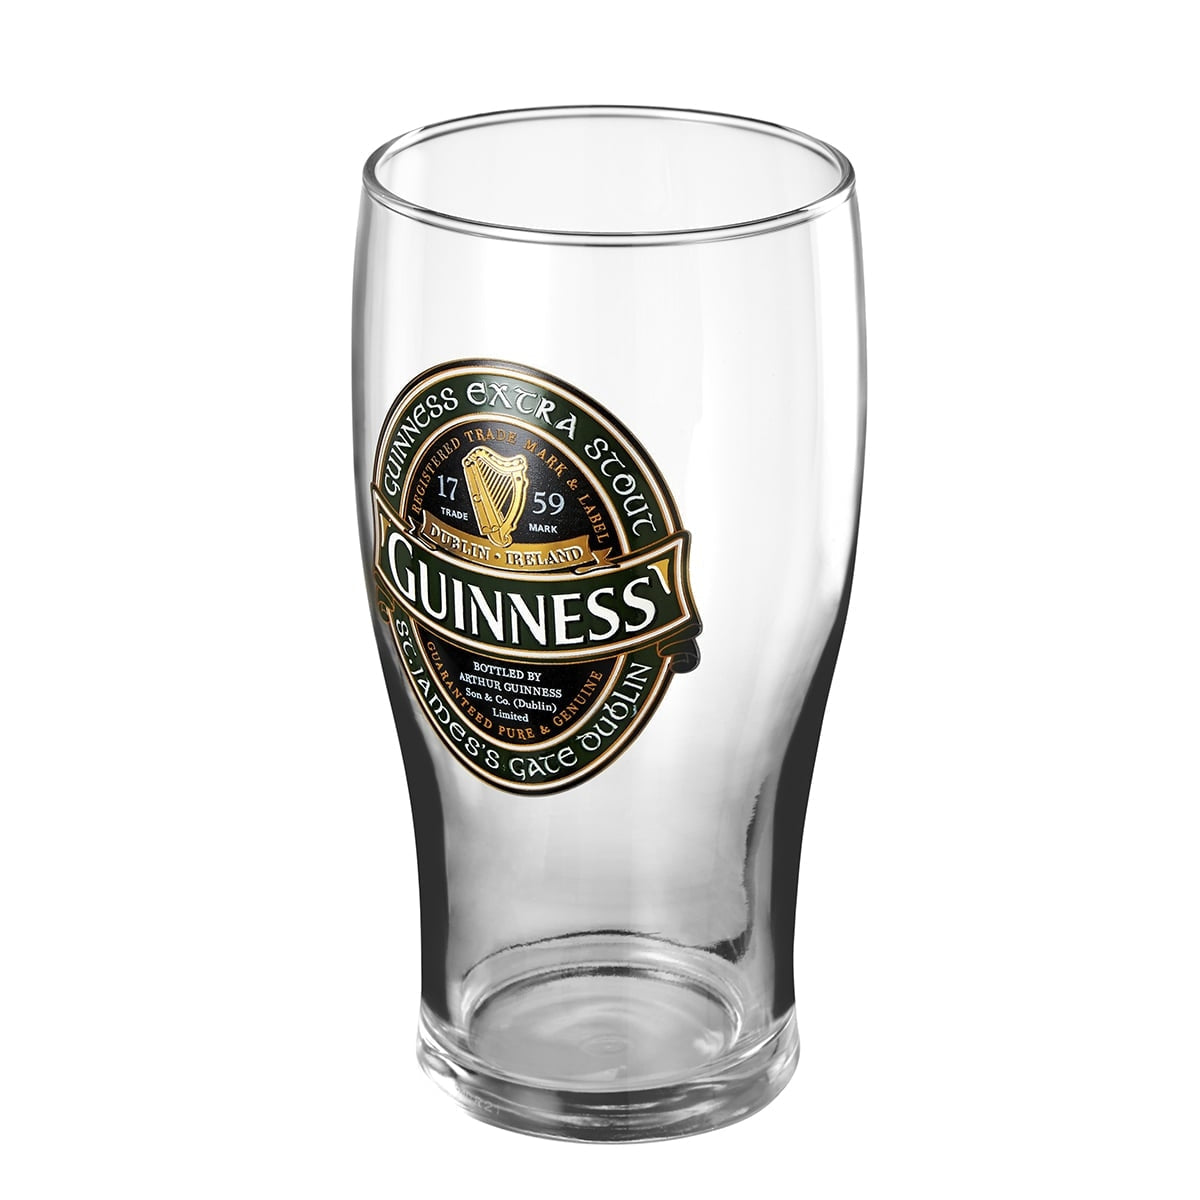 Guinness Ireland Collection Pint Glass - 24 Pack